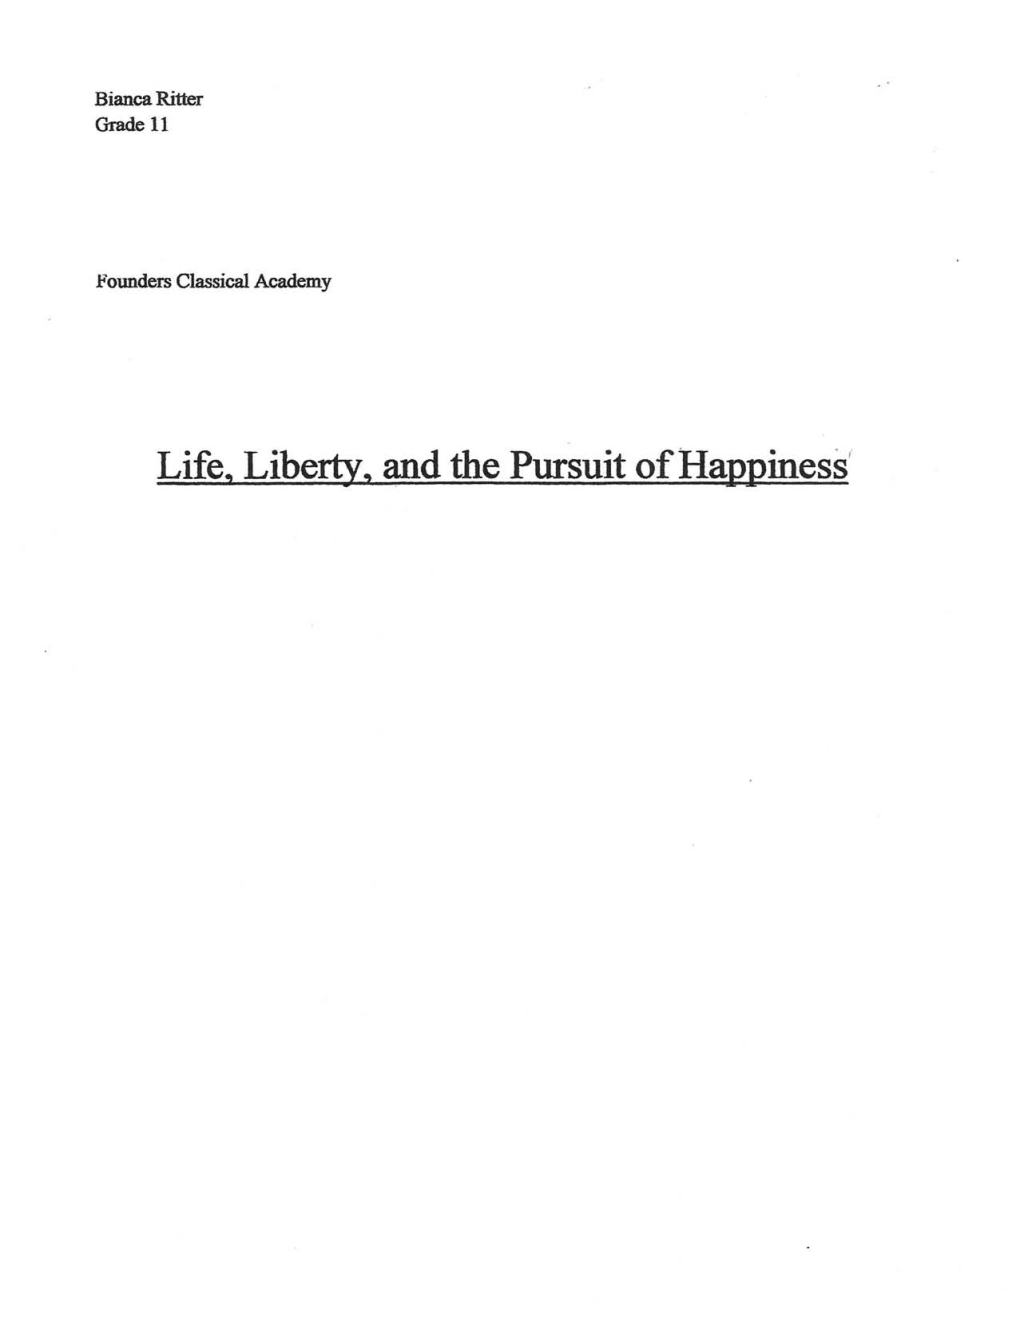 Life, Liberty, and the Pursuit Ofhajlpiness' Life, Liberty, and the Pwsuit Ofhappiness